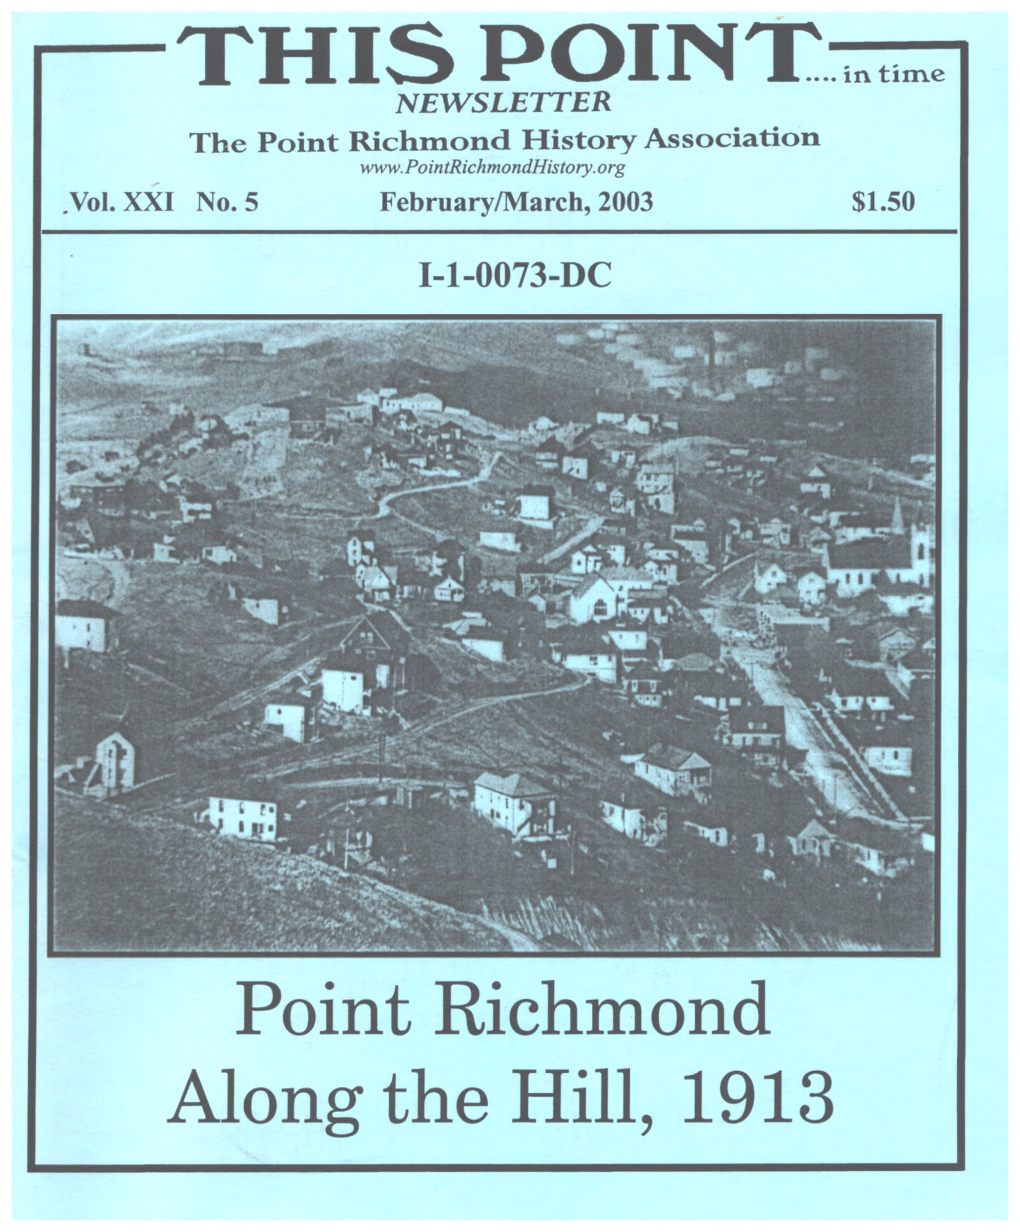 — THIS POINT— NEWSLETTER the Point Richmond History Association .Vol